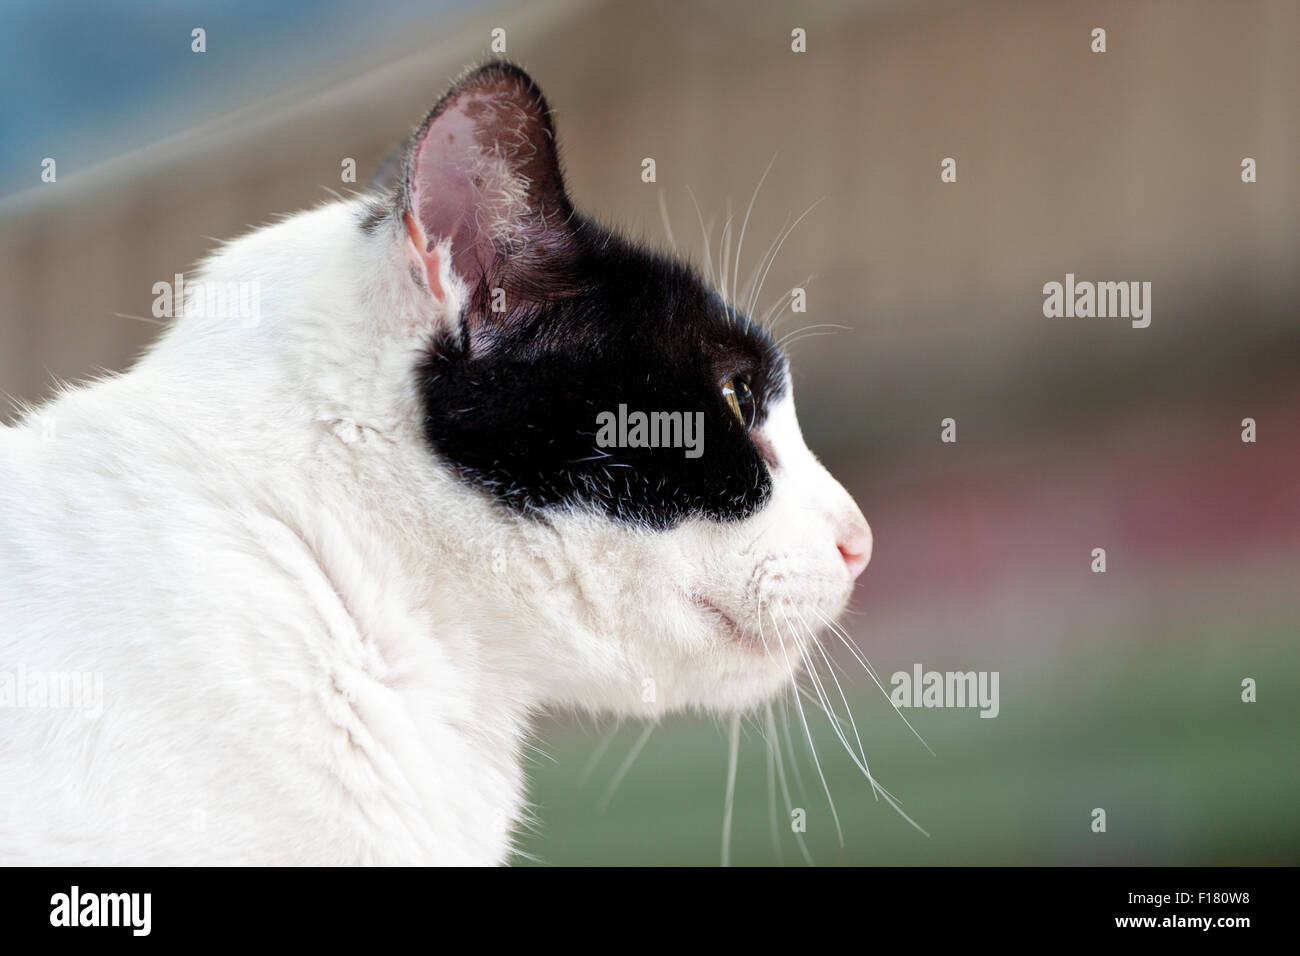 beautiful white cat with black color watching ahead Stock Photo